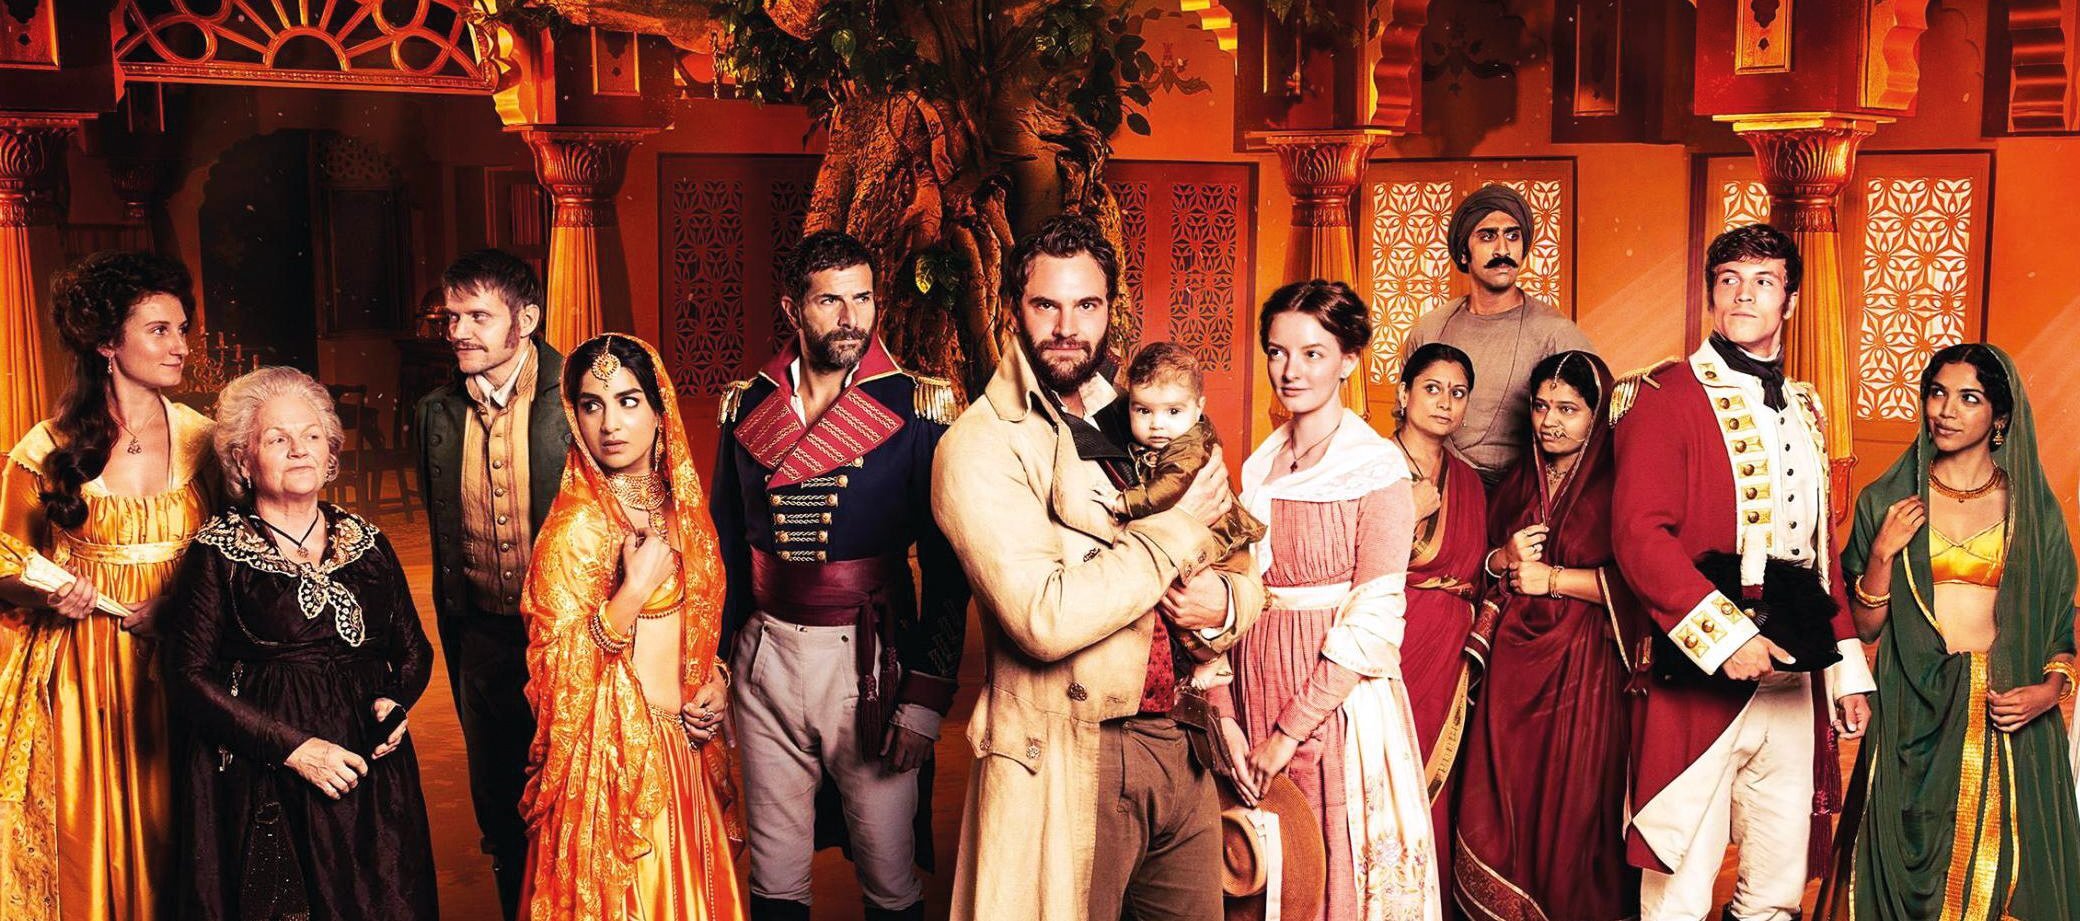 Beecham House was an interesting look at India at the end of the 18th Century.